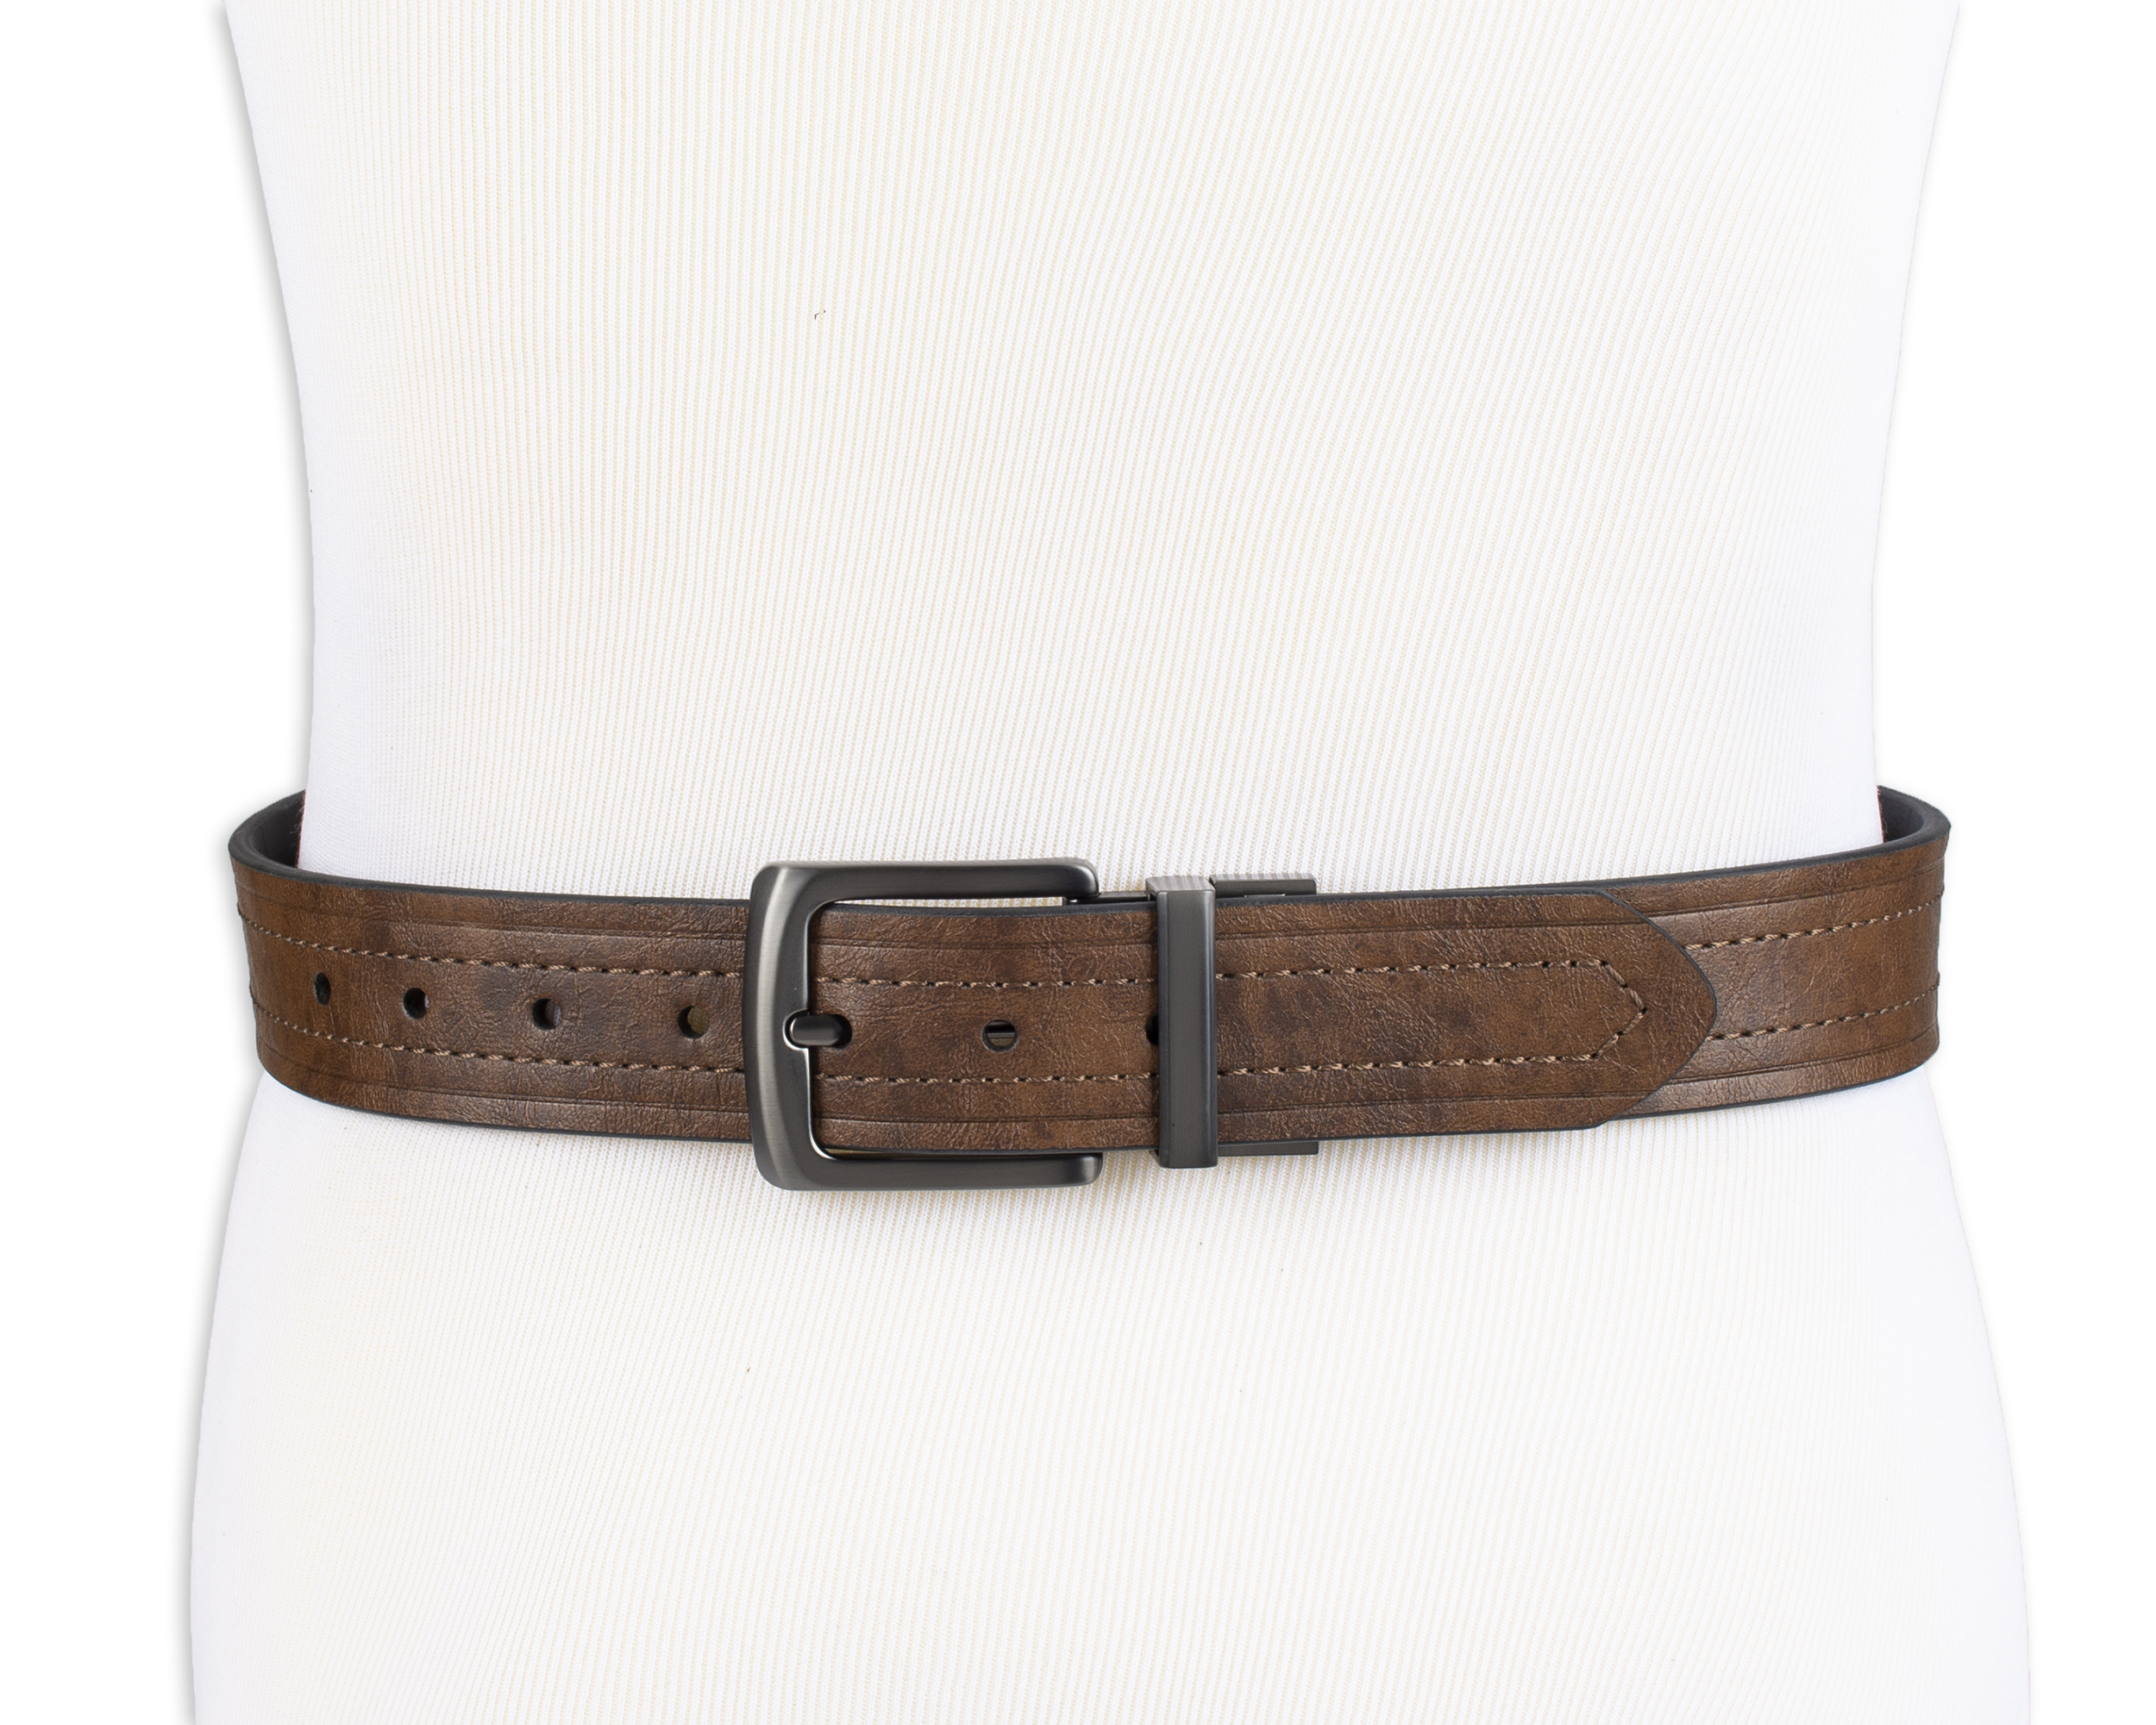 Levi's Men's Two-in-One Reversible Casual Belt, Brown/Black - image 6 of 9